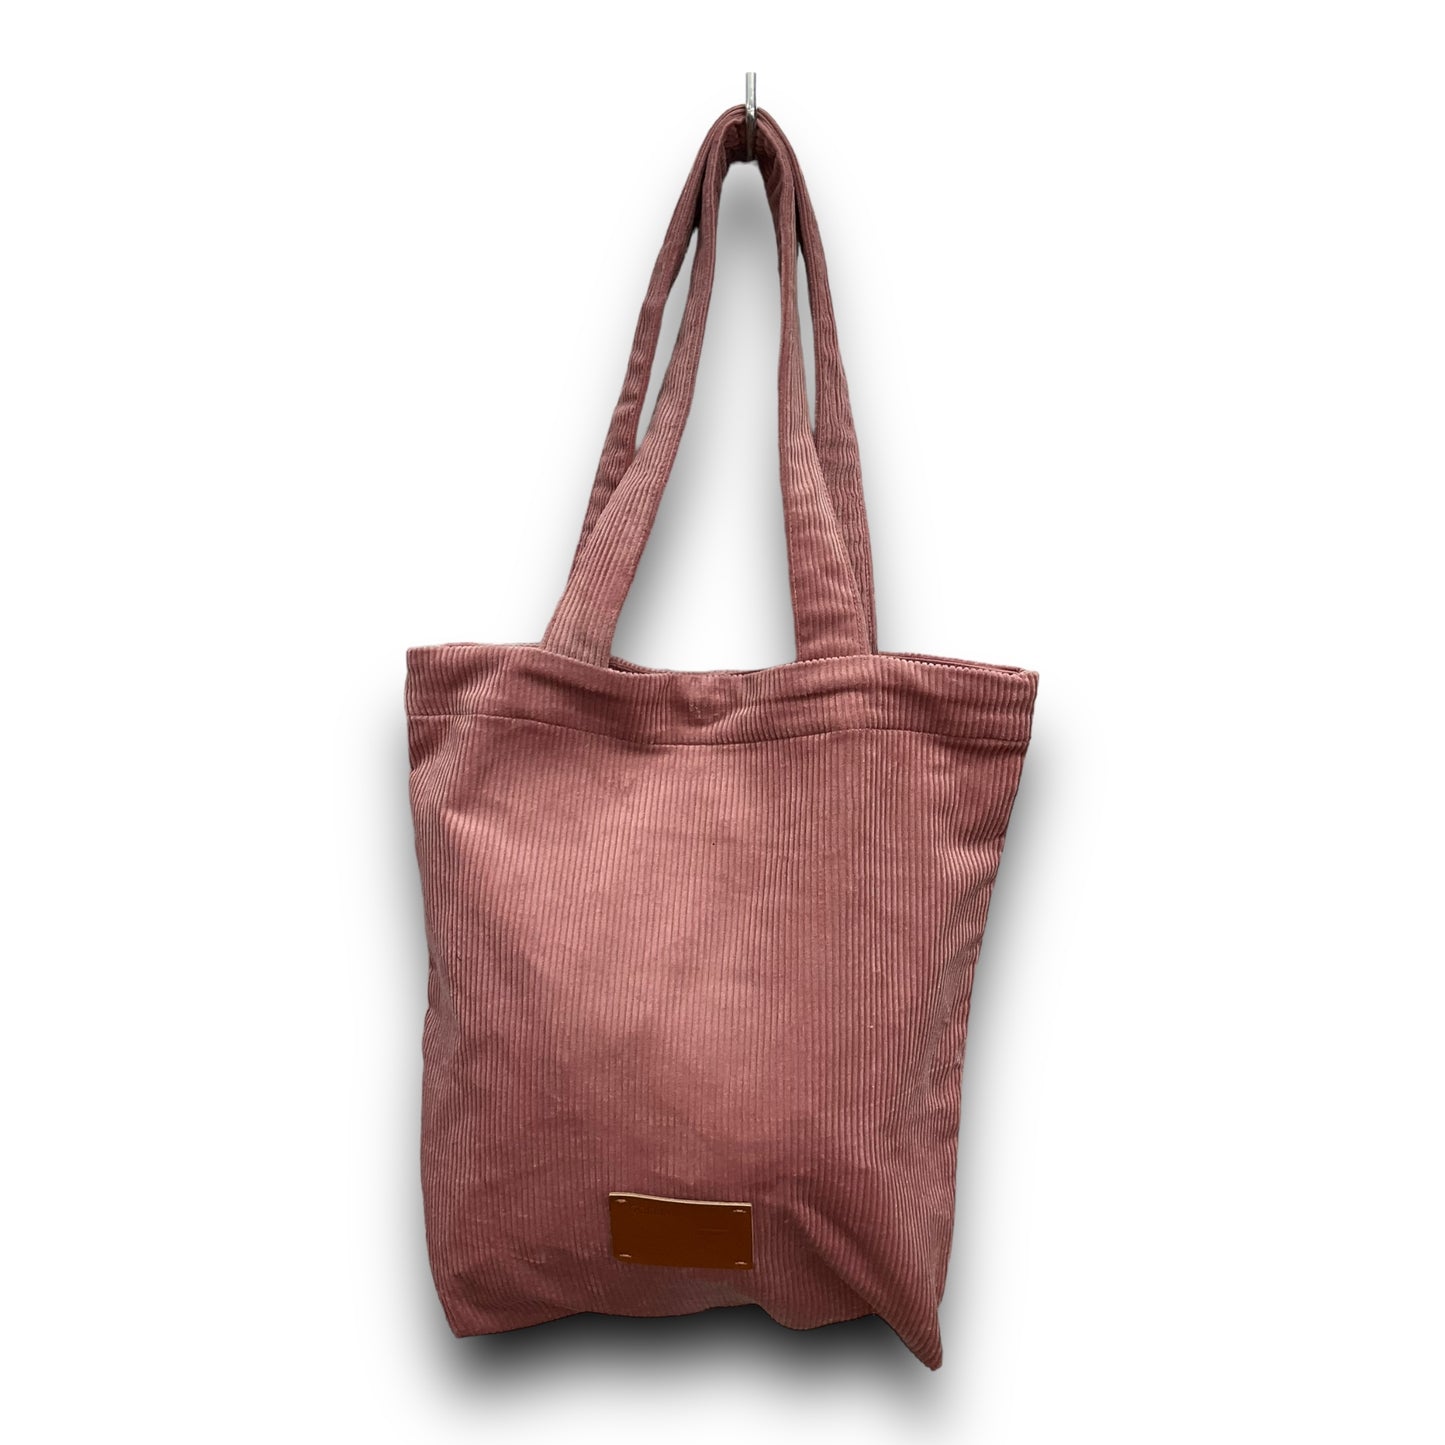 Tote By Clothes Mentor  Size: Medium